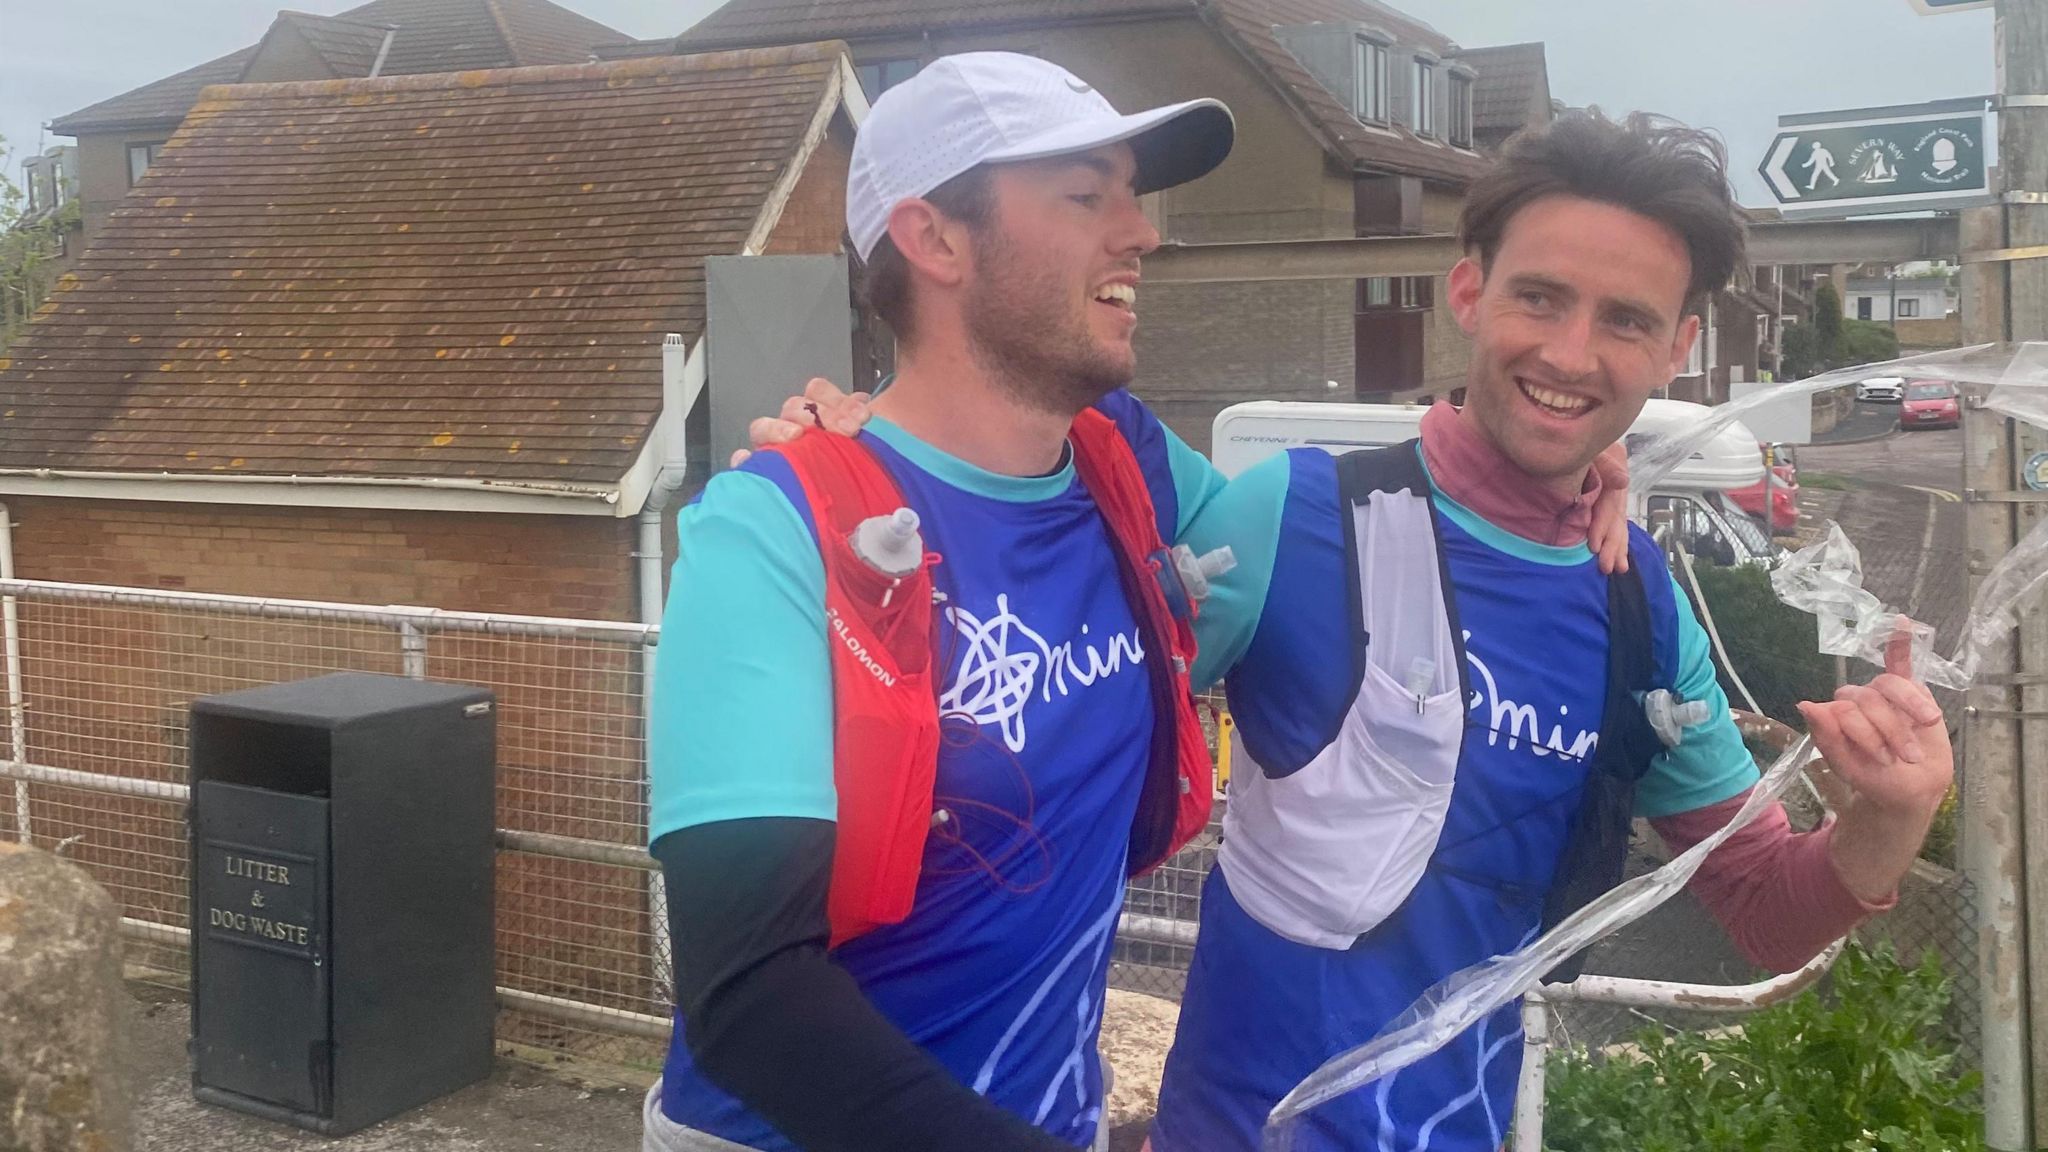 Tom and Cameron, dressed in running clothes have their arms around eachother as they run. They are smiling and wearing vests with the Mind logo on them